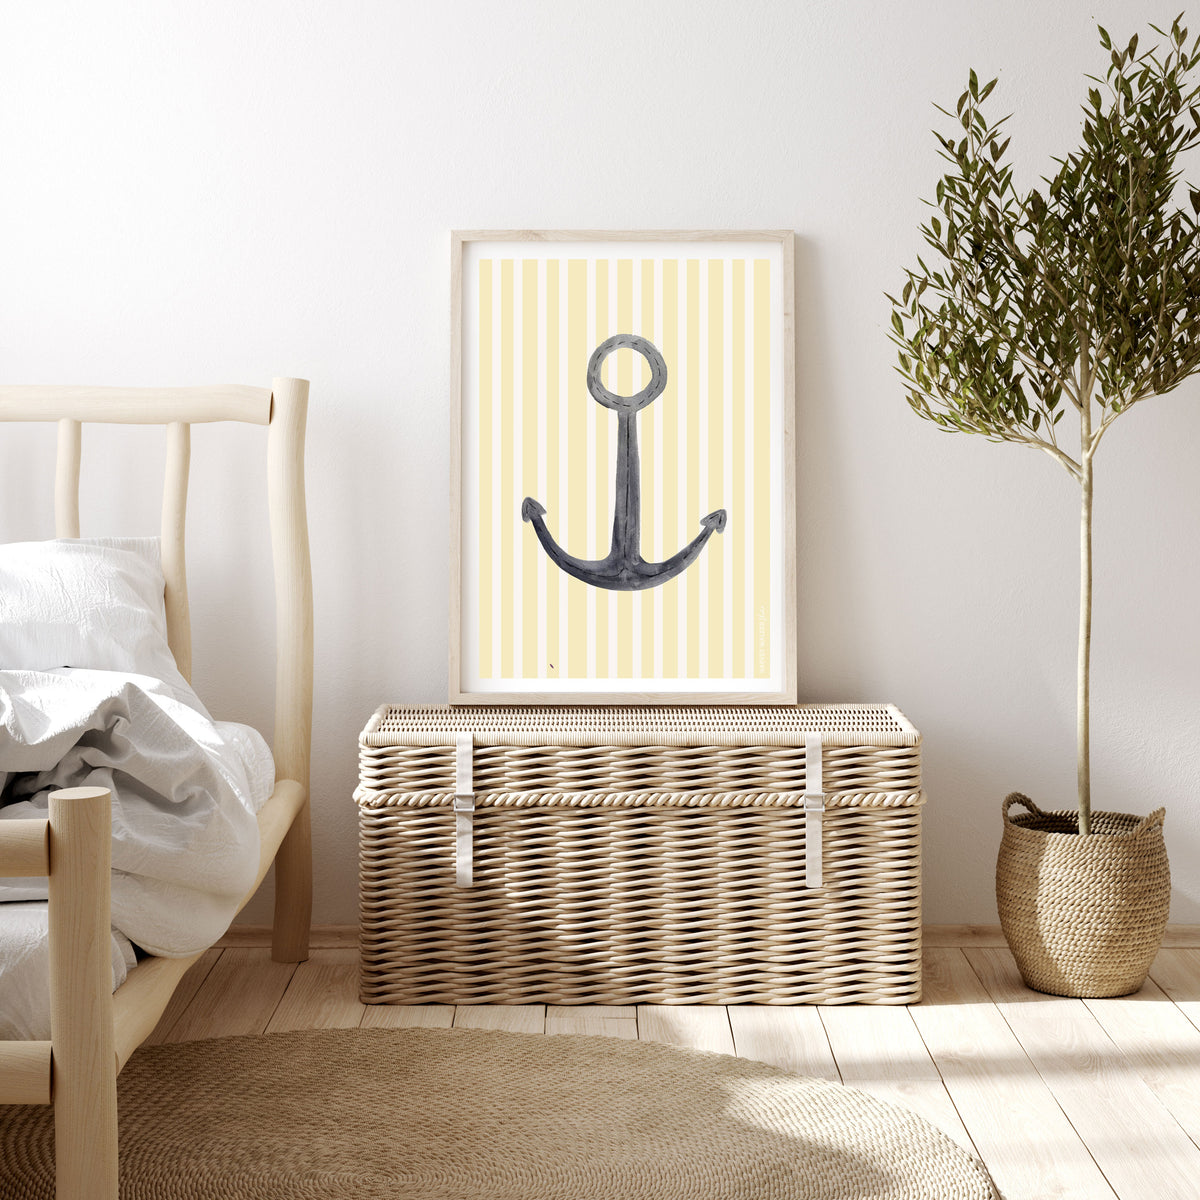 Framed fine art nautical anchor print positioned in minimalist holiday bedroom. Printed on giclee textured cotton rag 310g, with yellow and white stripe background. classic anchor watercolour illustration. 